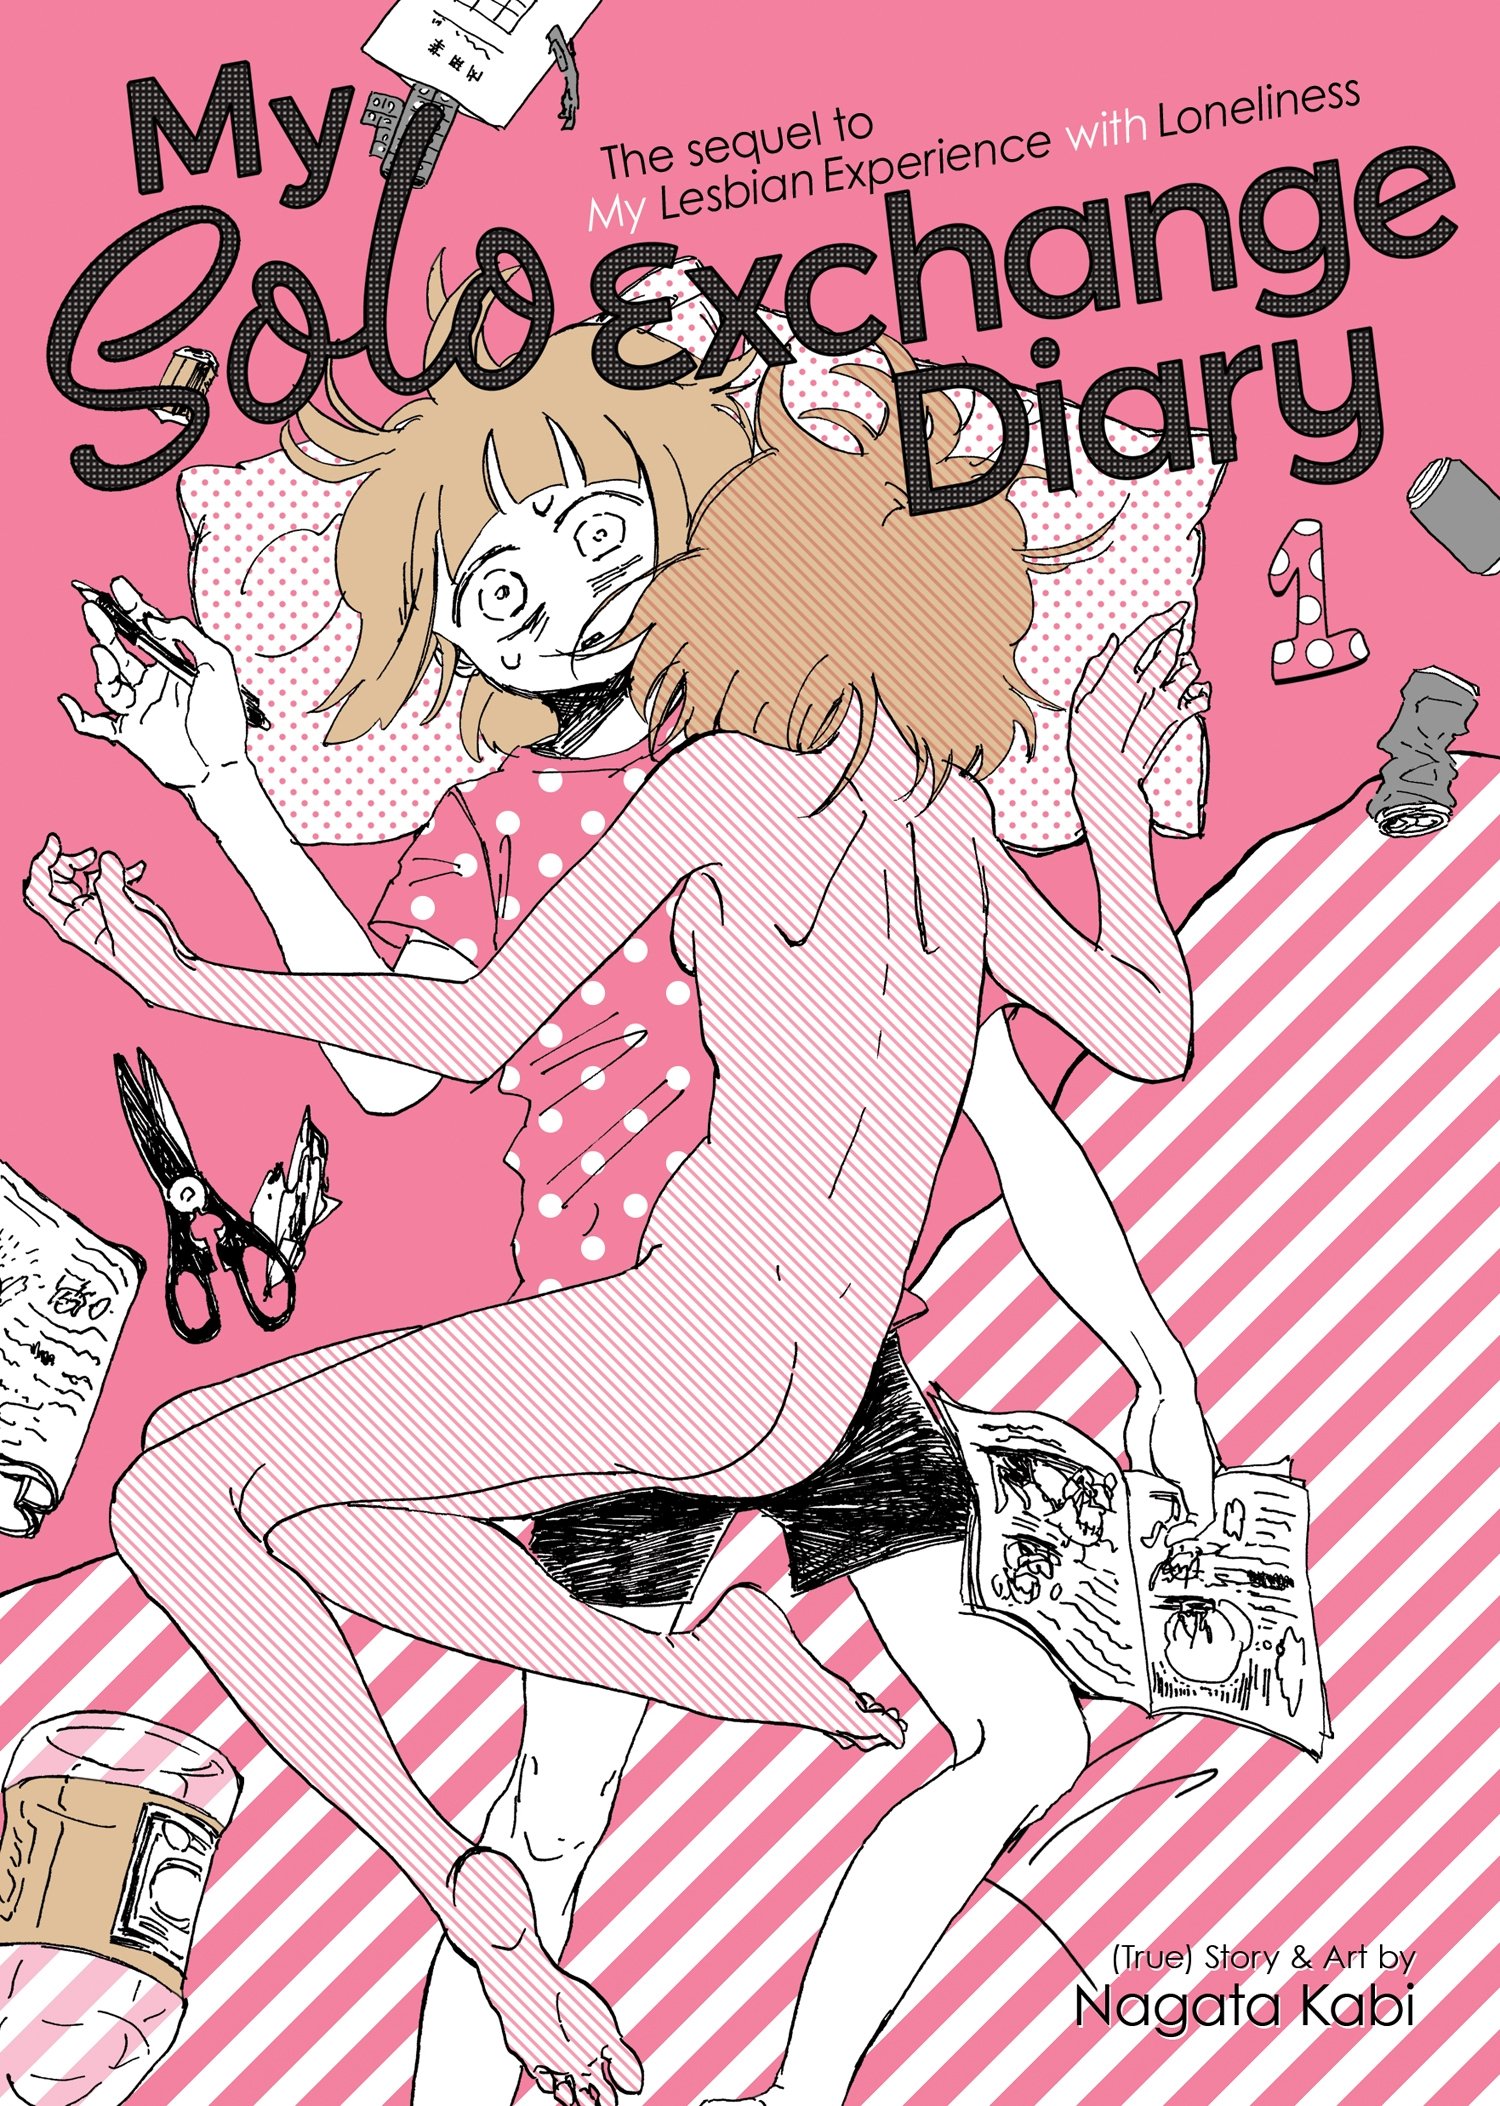 My Solo Exchange Diary Graphic Novel Volume 1 (Mature)